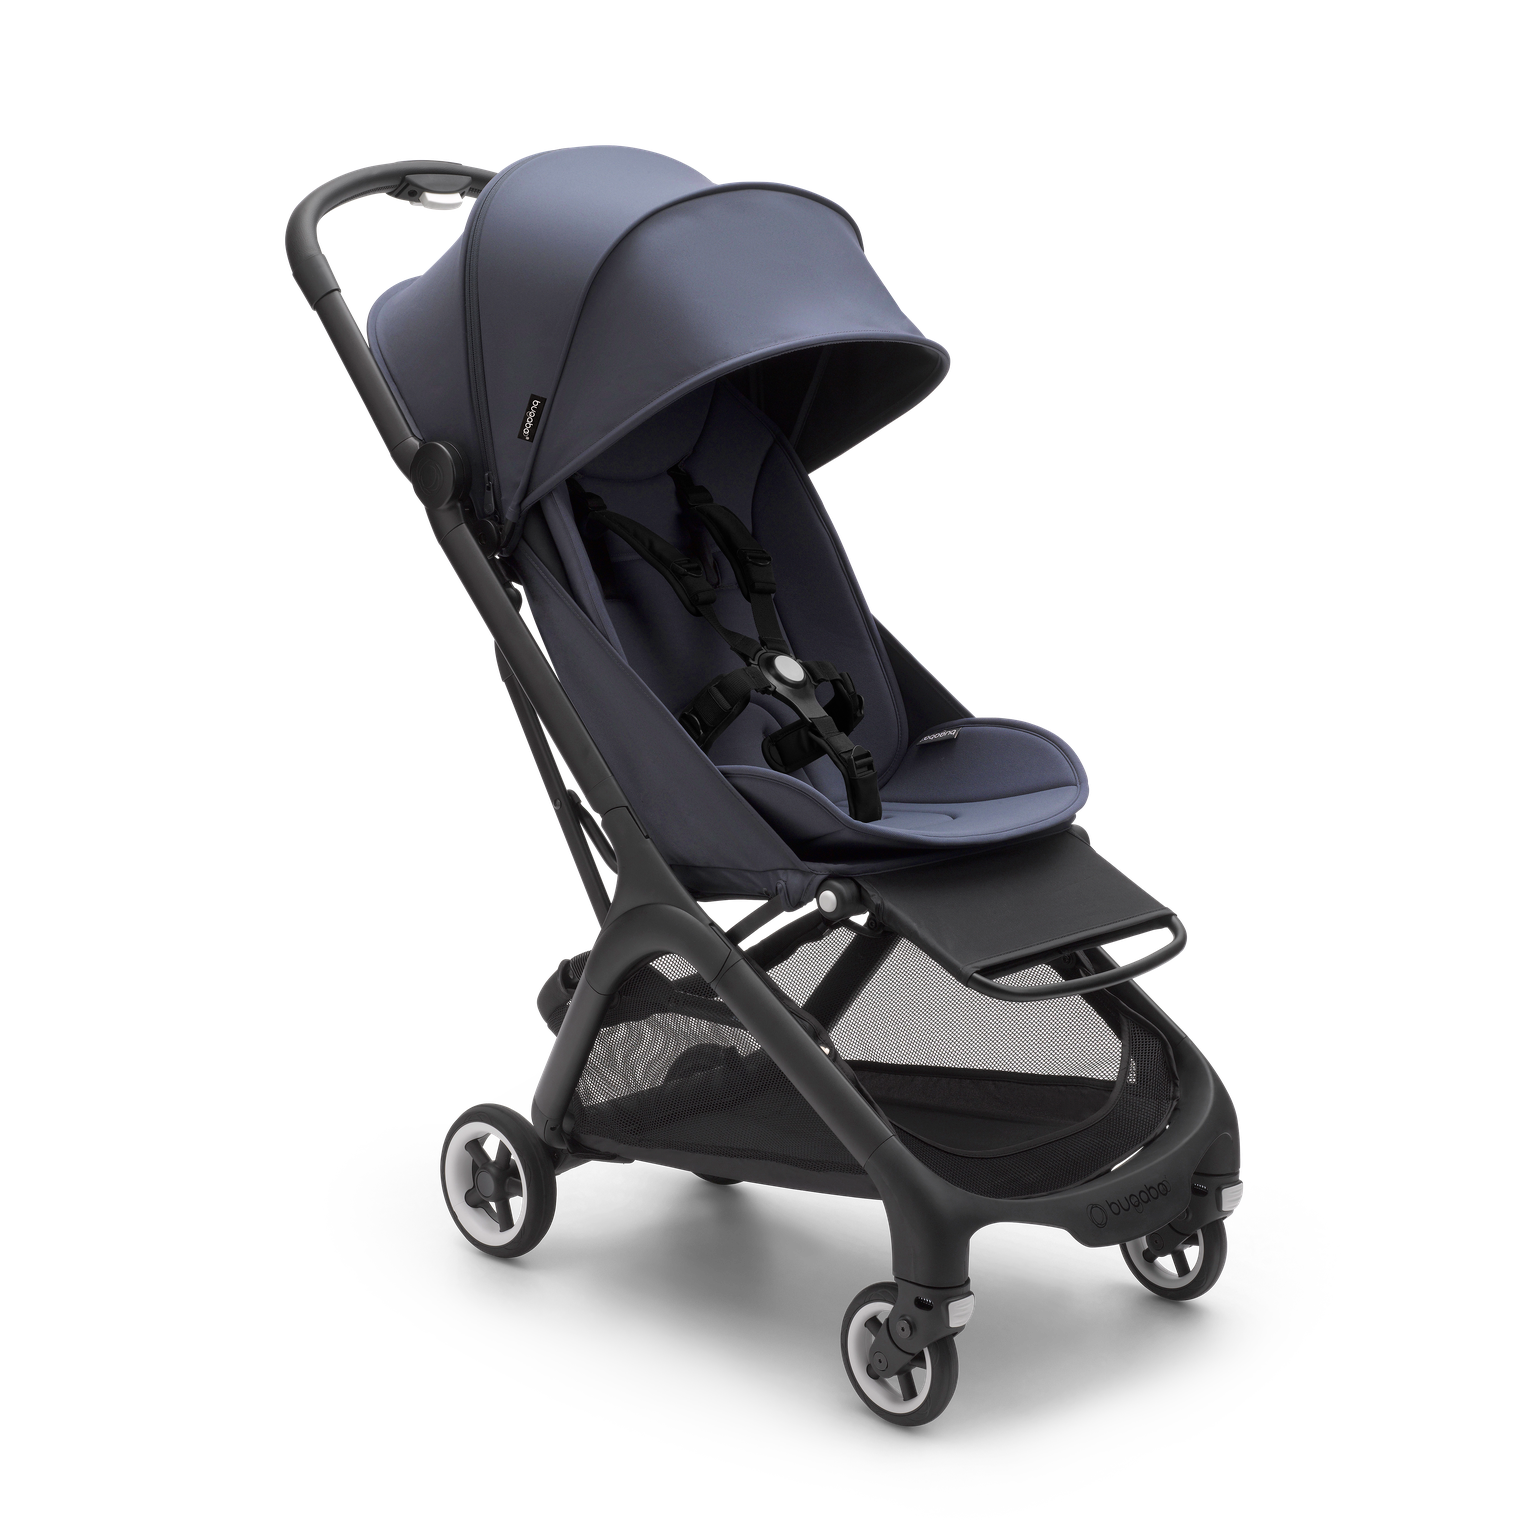 Bugaboo Butterfly Compact Stroller & Accessories Bundle - Stormy Blue